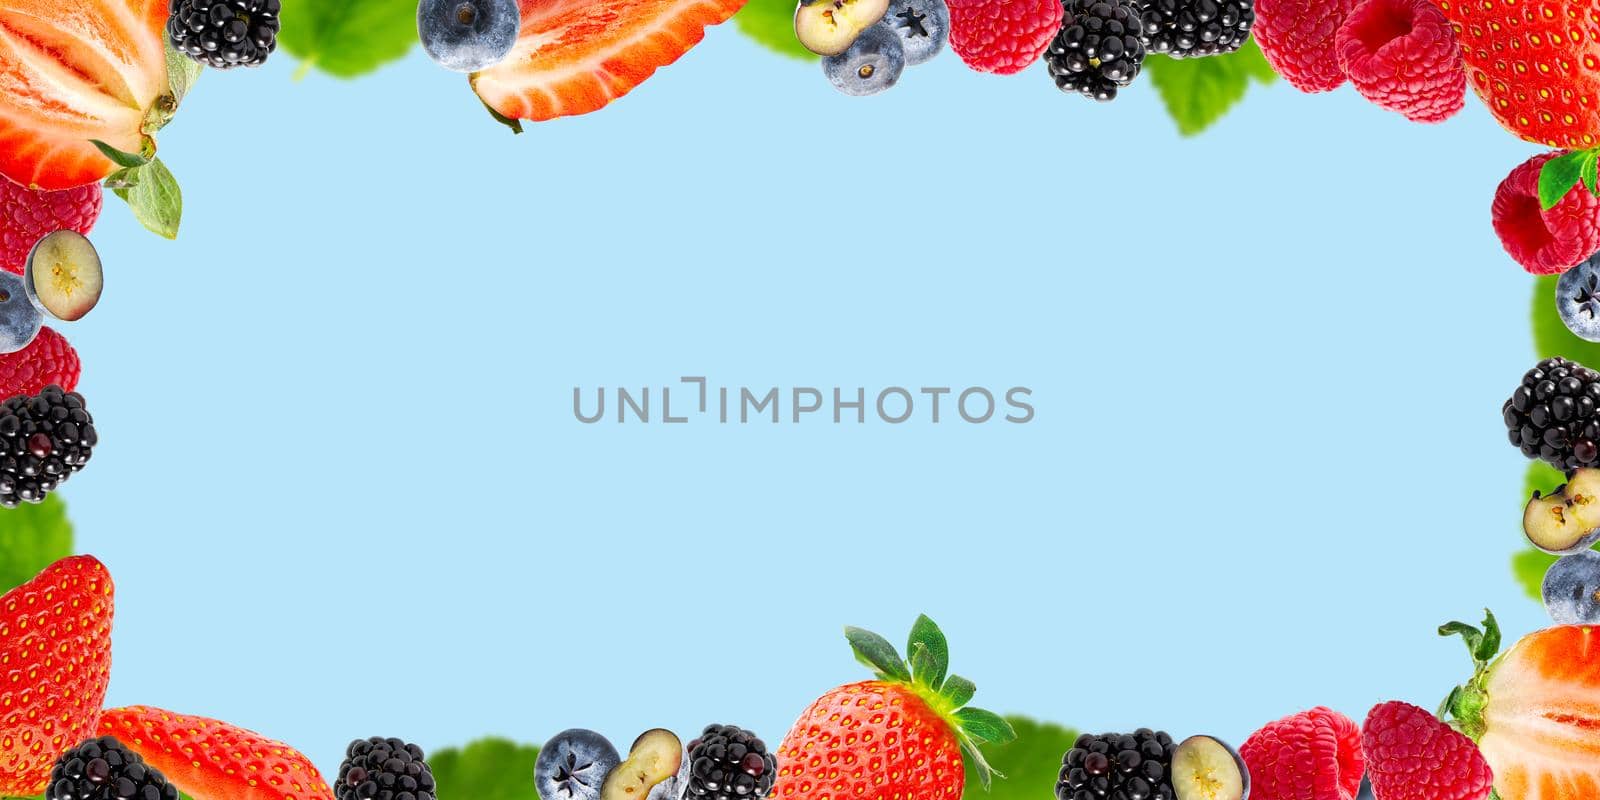 Berries Frame on white Background. Strawberry, Blueberry, Raspberries, and Blackberry. by PhotoTime